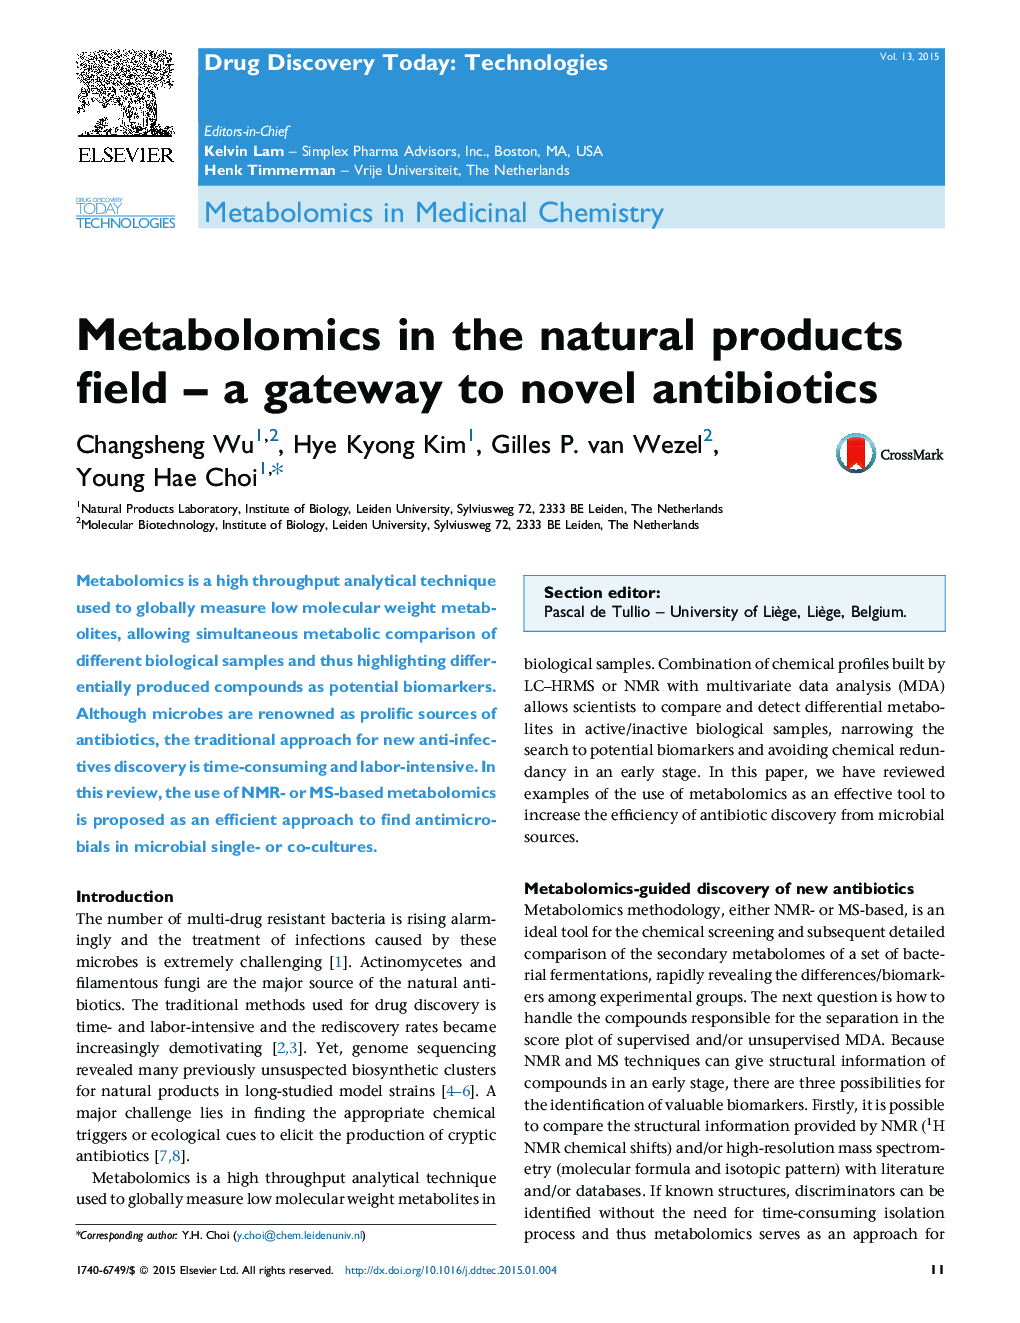 Metabolomics in the natural products field – a gateway to novel antibiotics